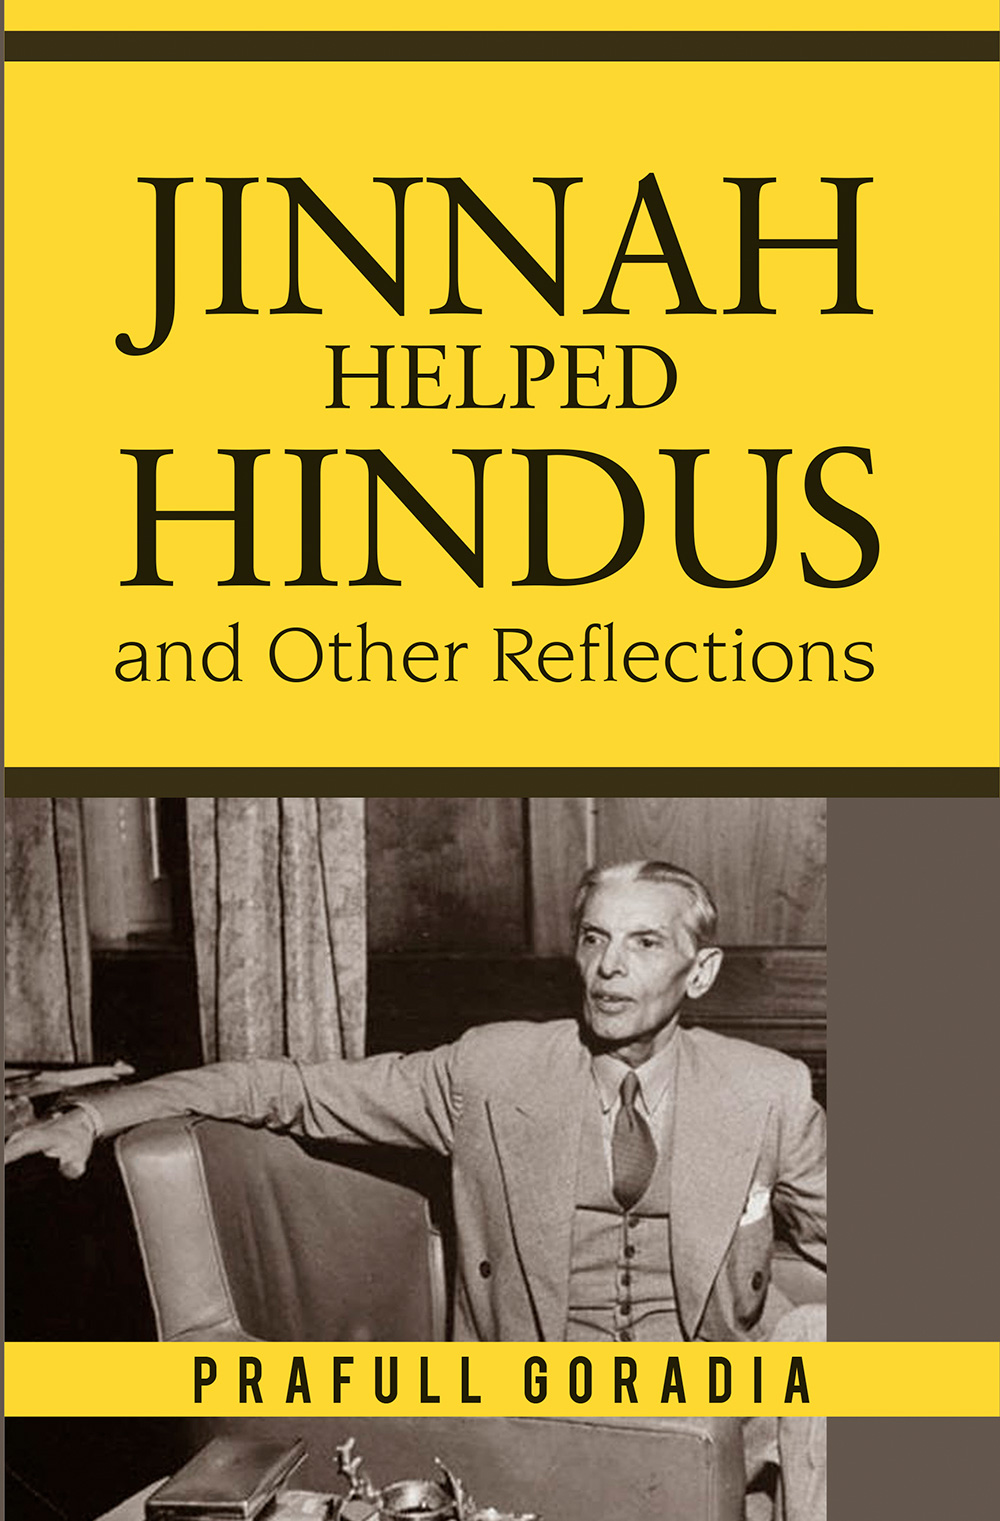 Jinnah helped Hindus and Other Reflections